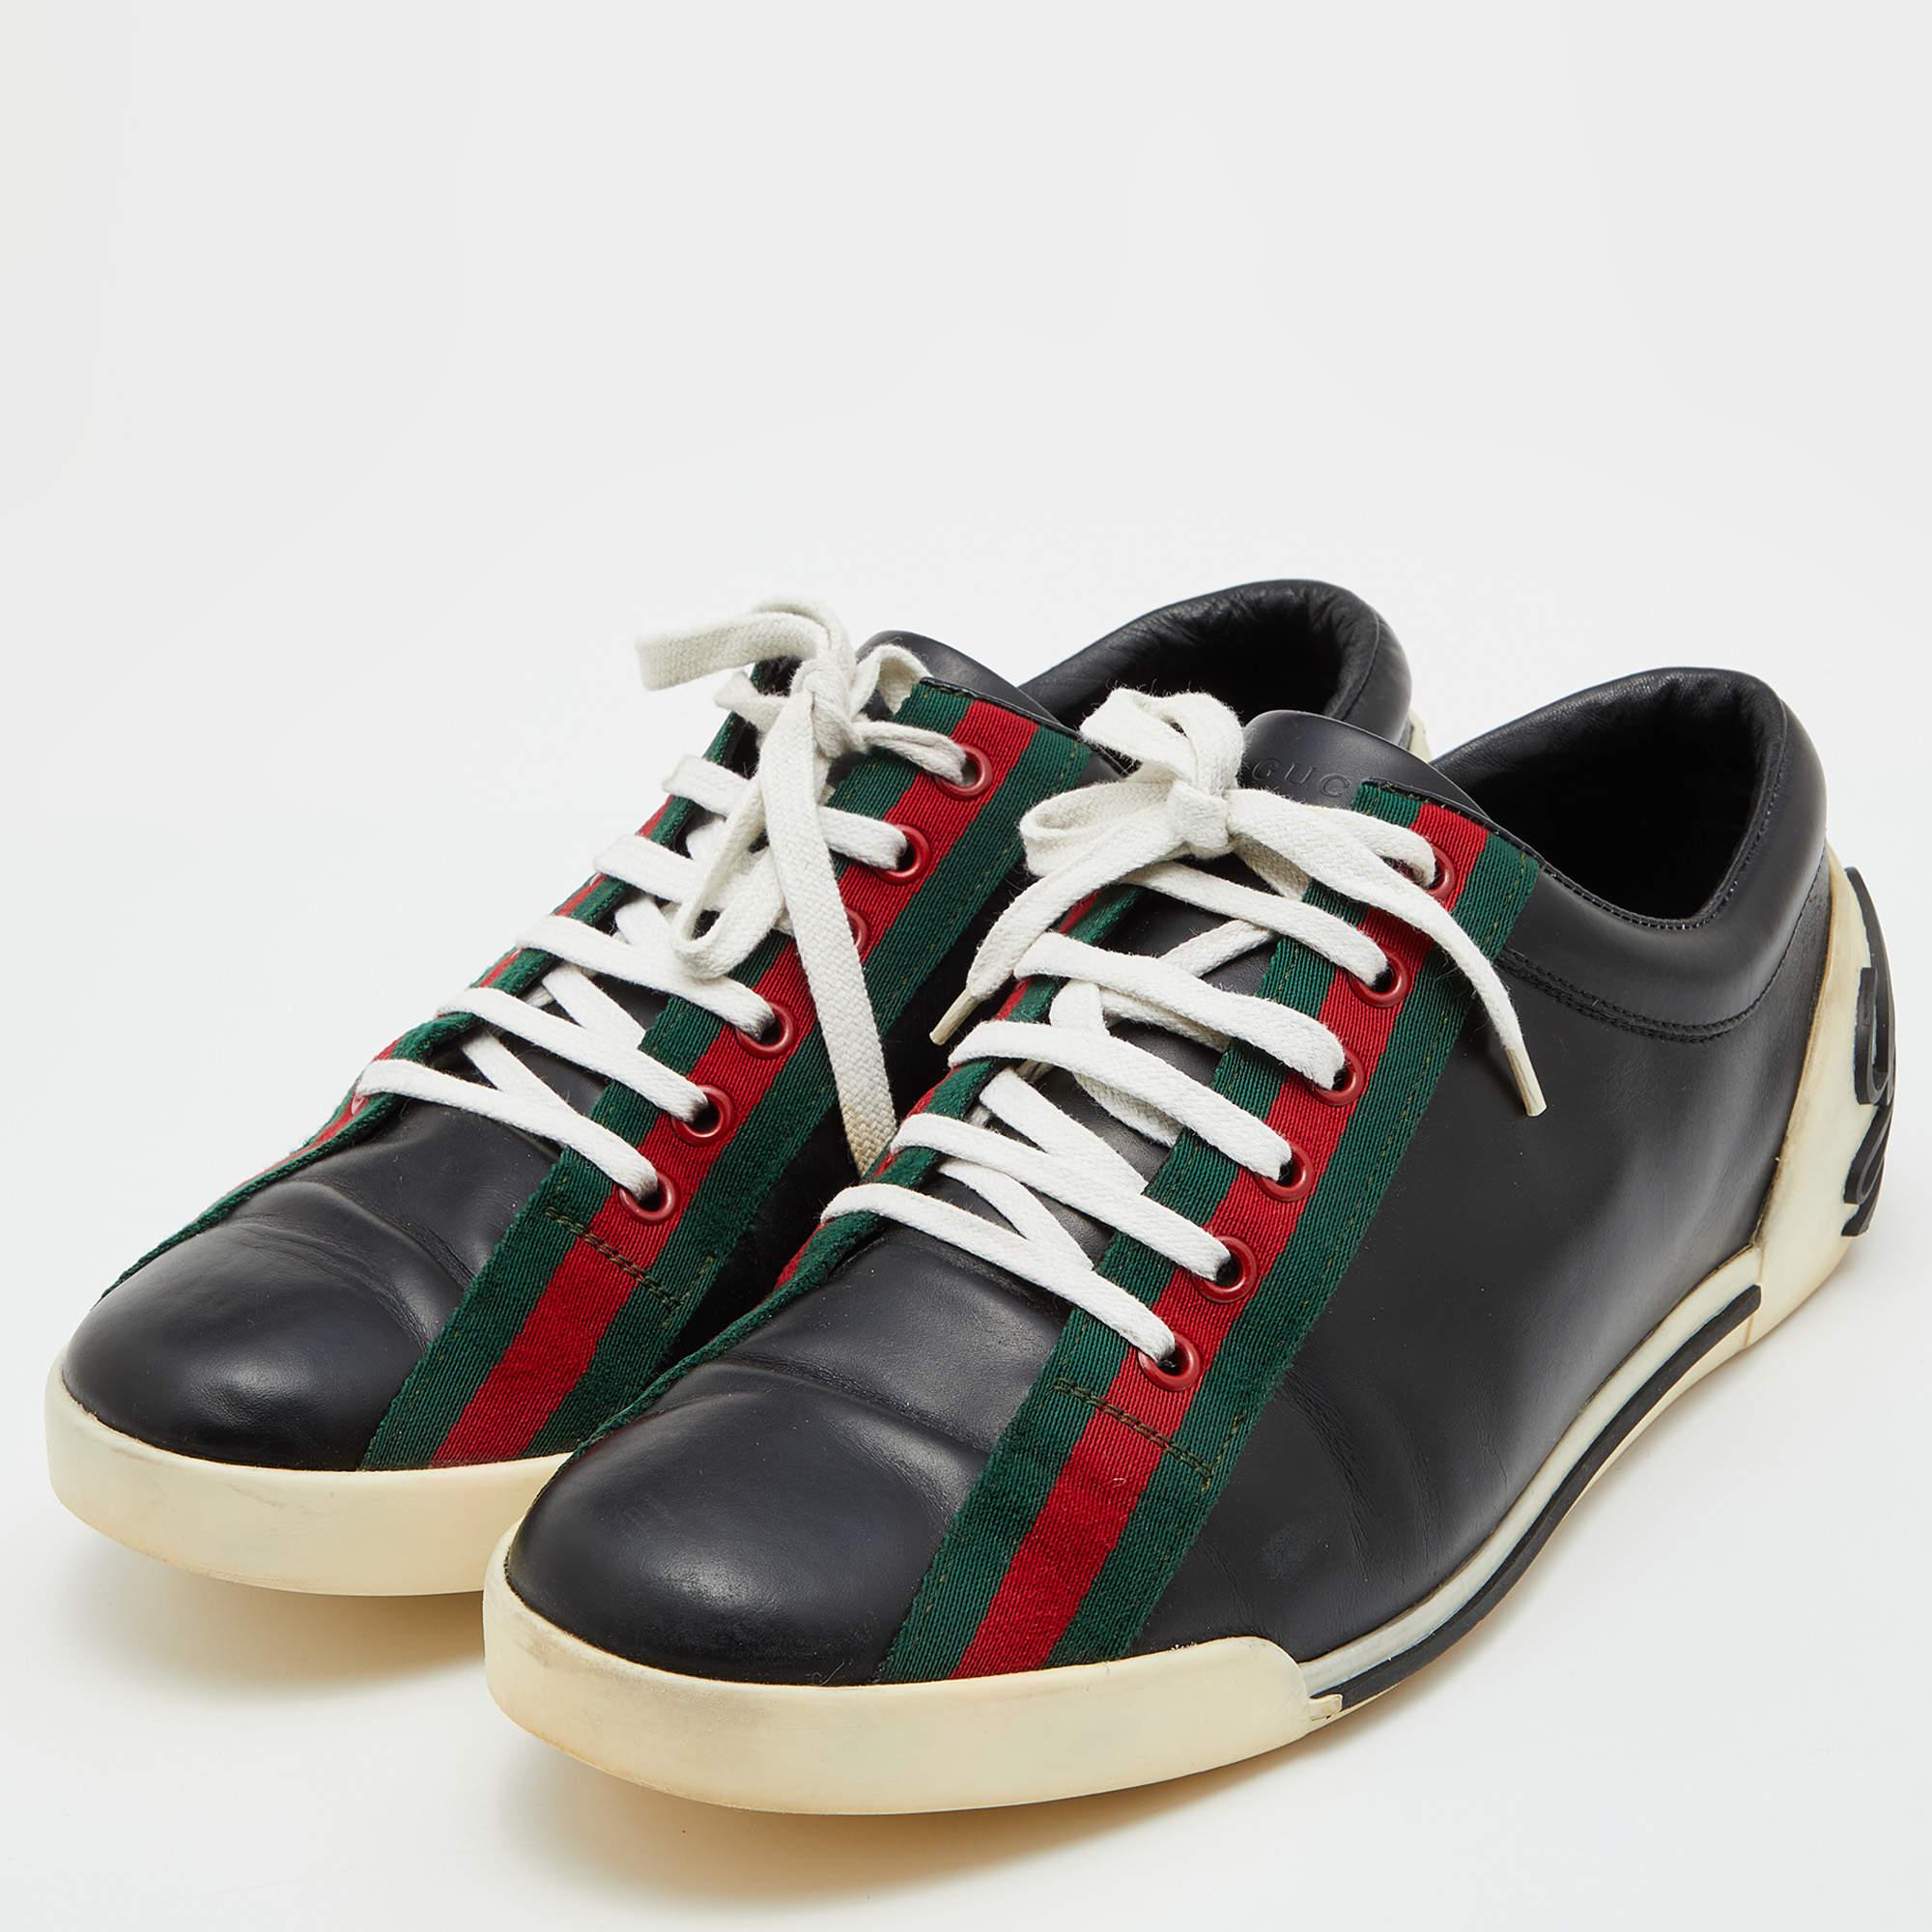 Gucci Black Leather Web Detail Low Top Sneakers Size 43 1